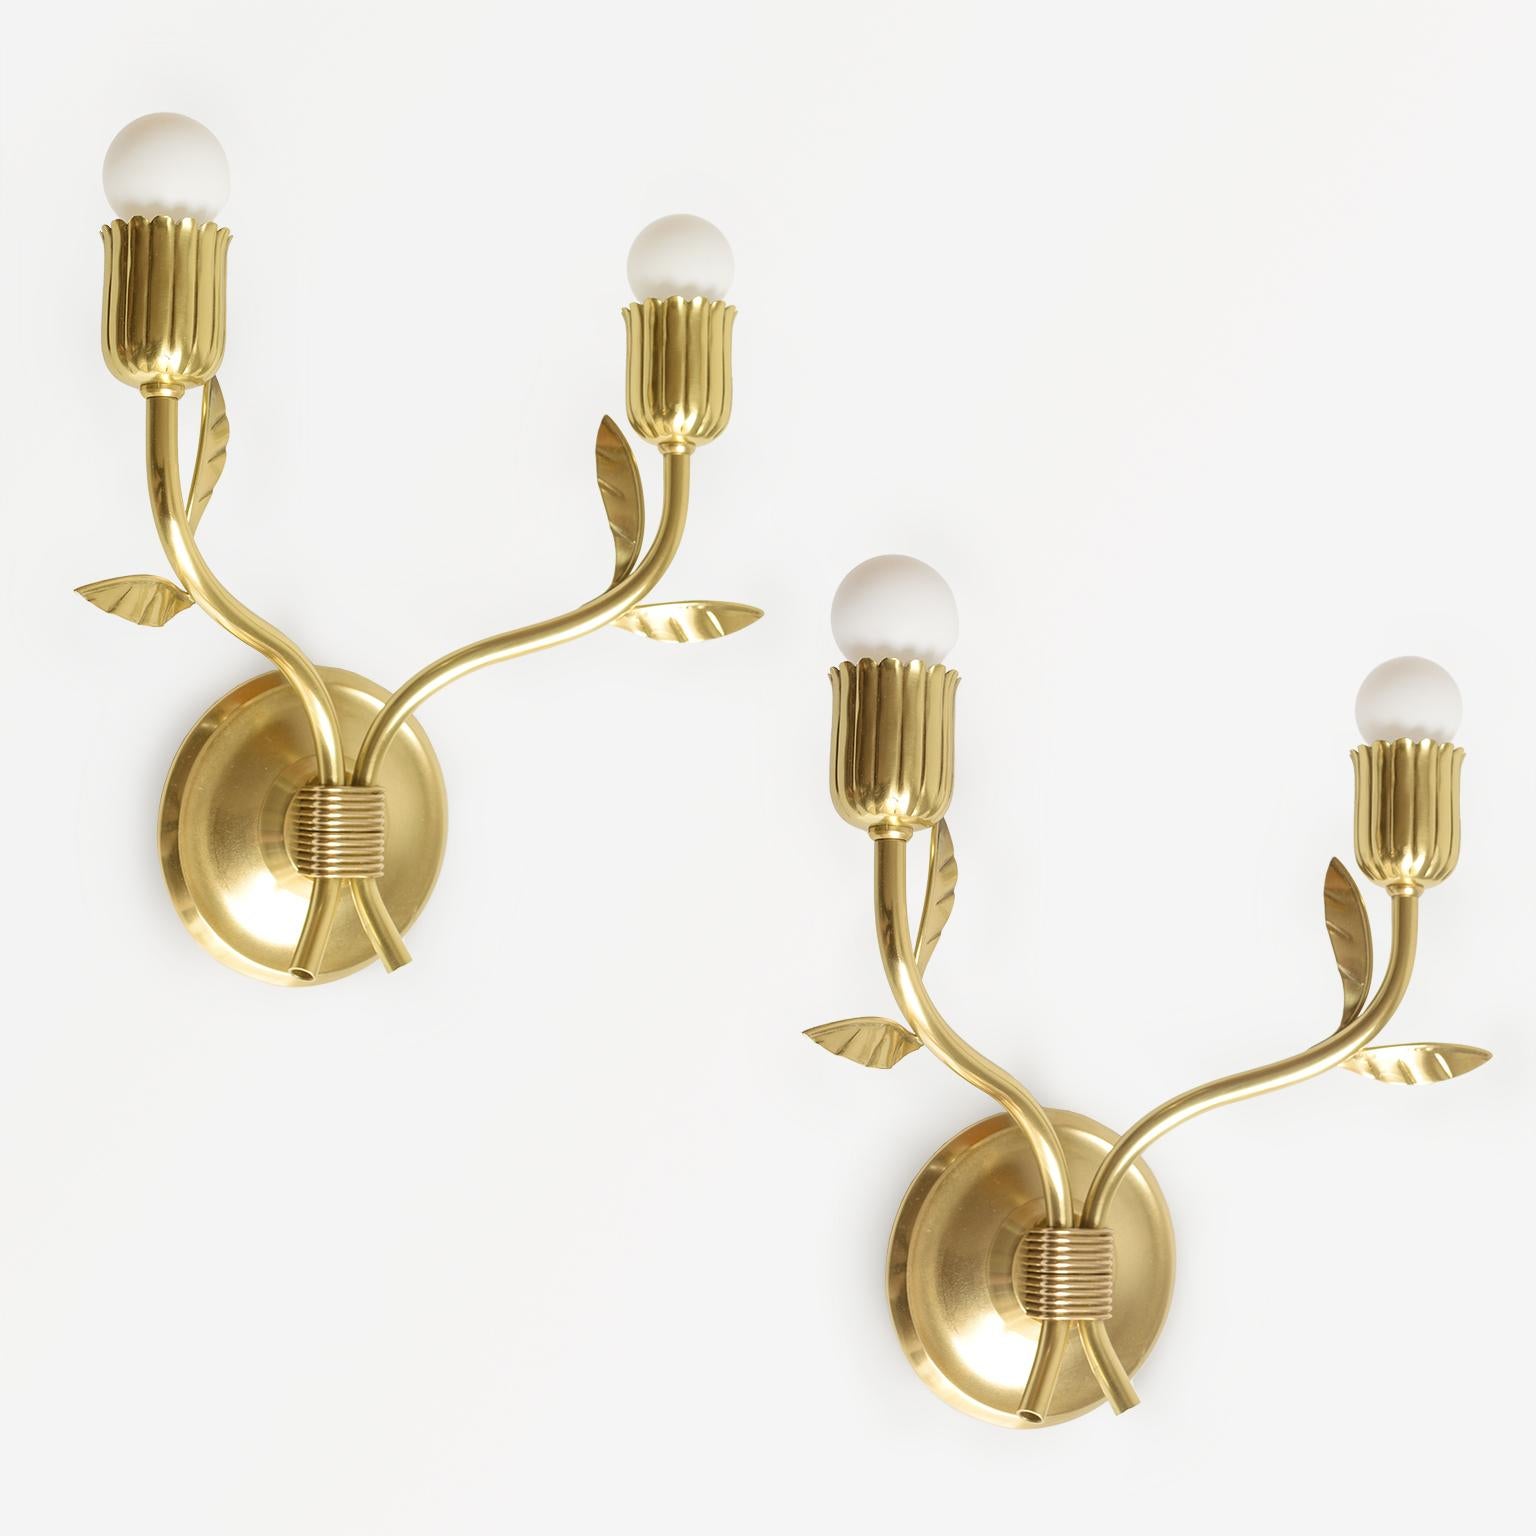 Polished Pair of Scandinavian Modern Floral Double Arm Sconces in Brass